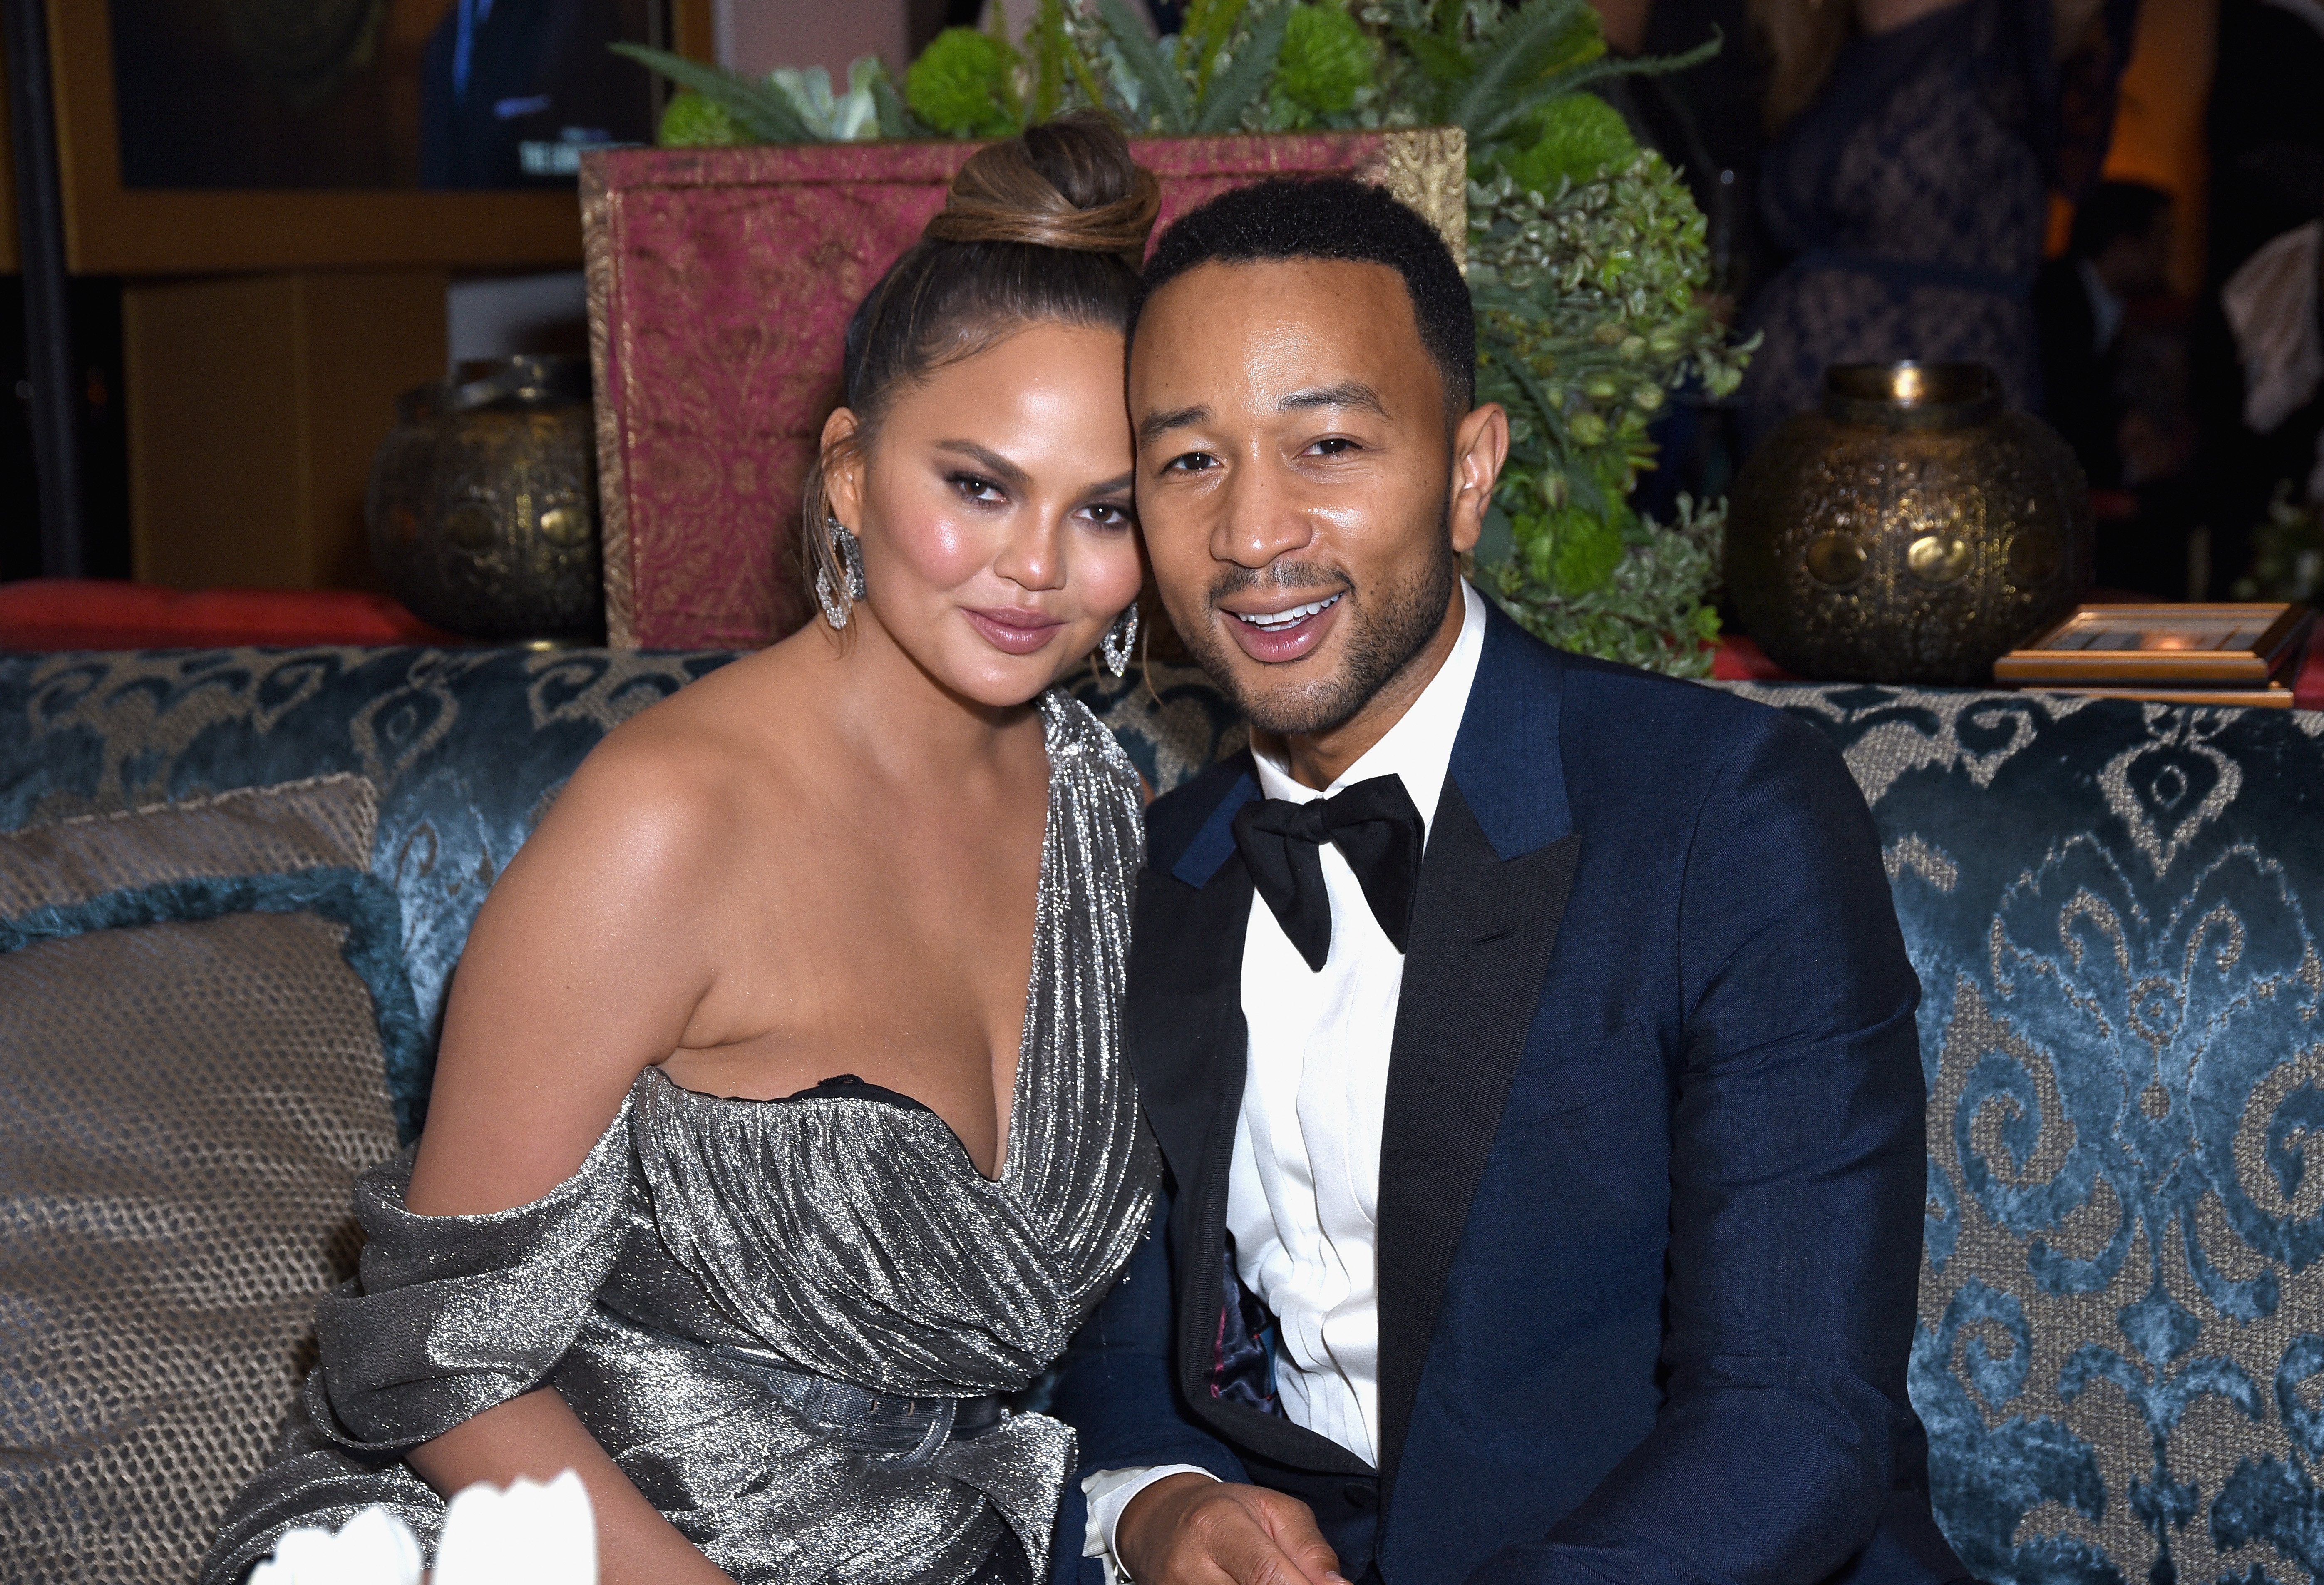 Chrissy Teigen and John Legend attend Hulu's 2018 Emmy Party on September 17, 2018, in Los Angeles, California. | Source: Getty Images.